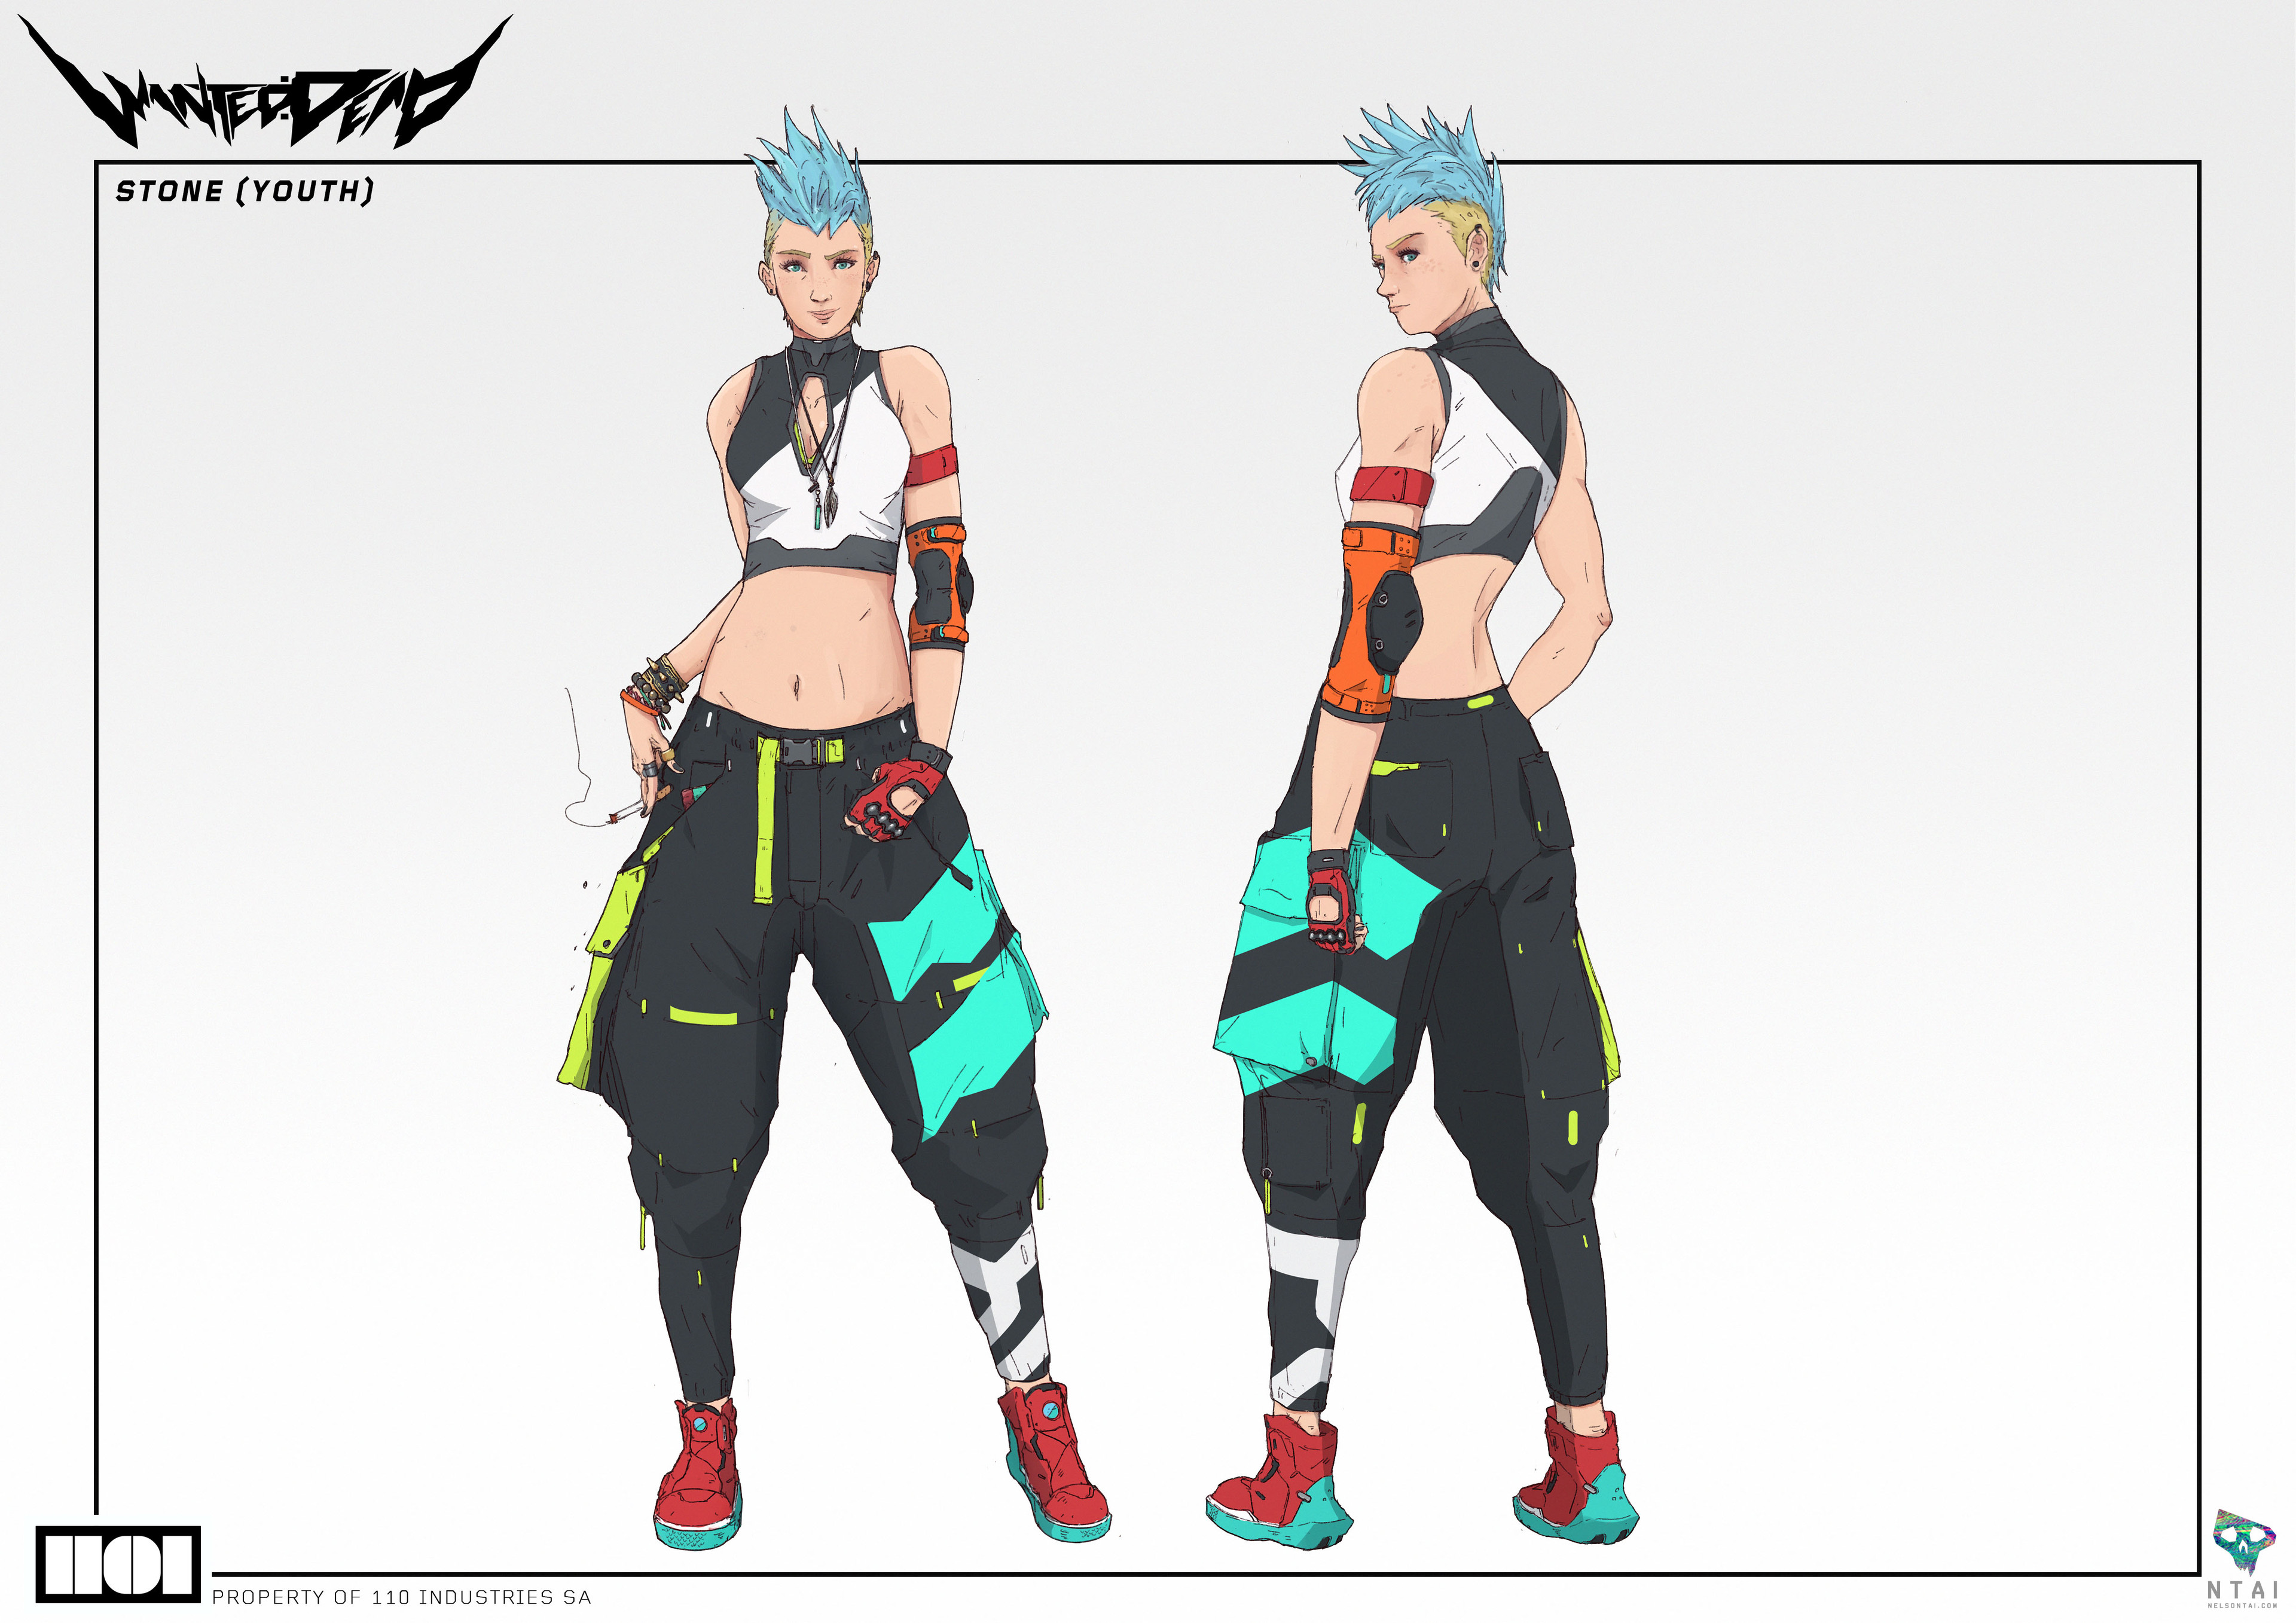 One of my favs among the characters I got to design - the young version of Stone. I like the sporty / punk look along with the blue hair :)